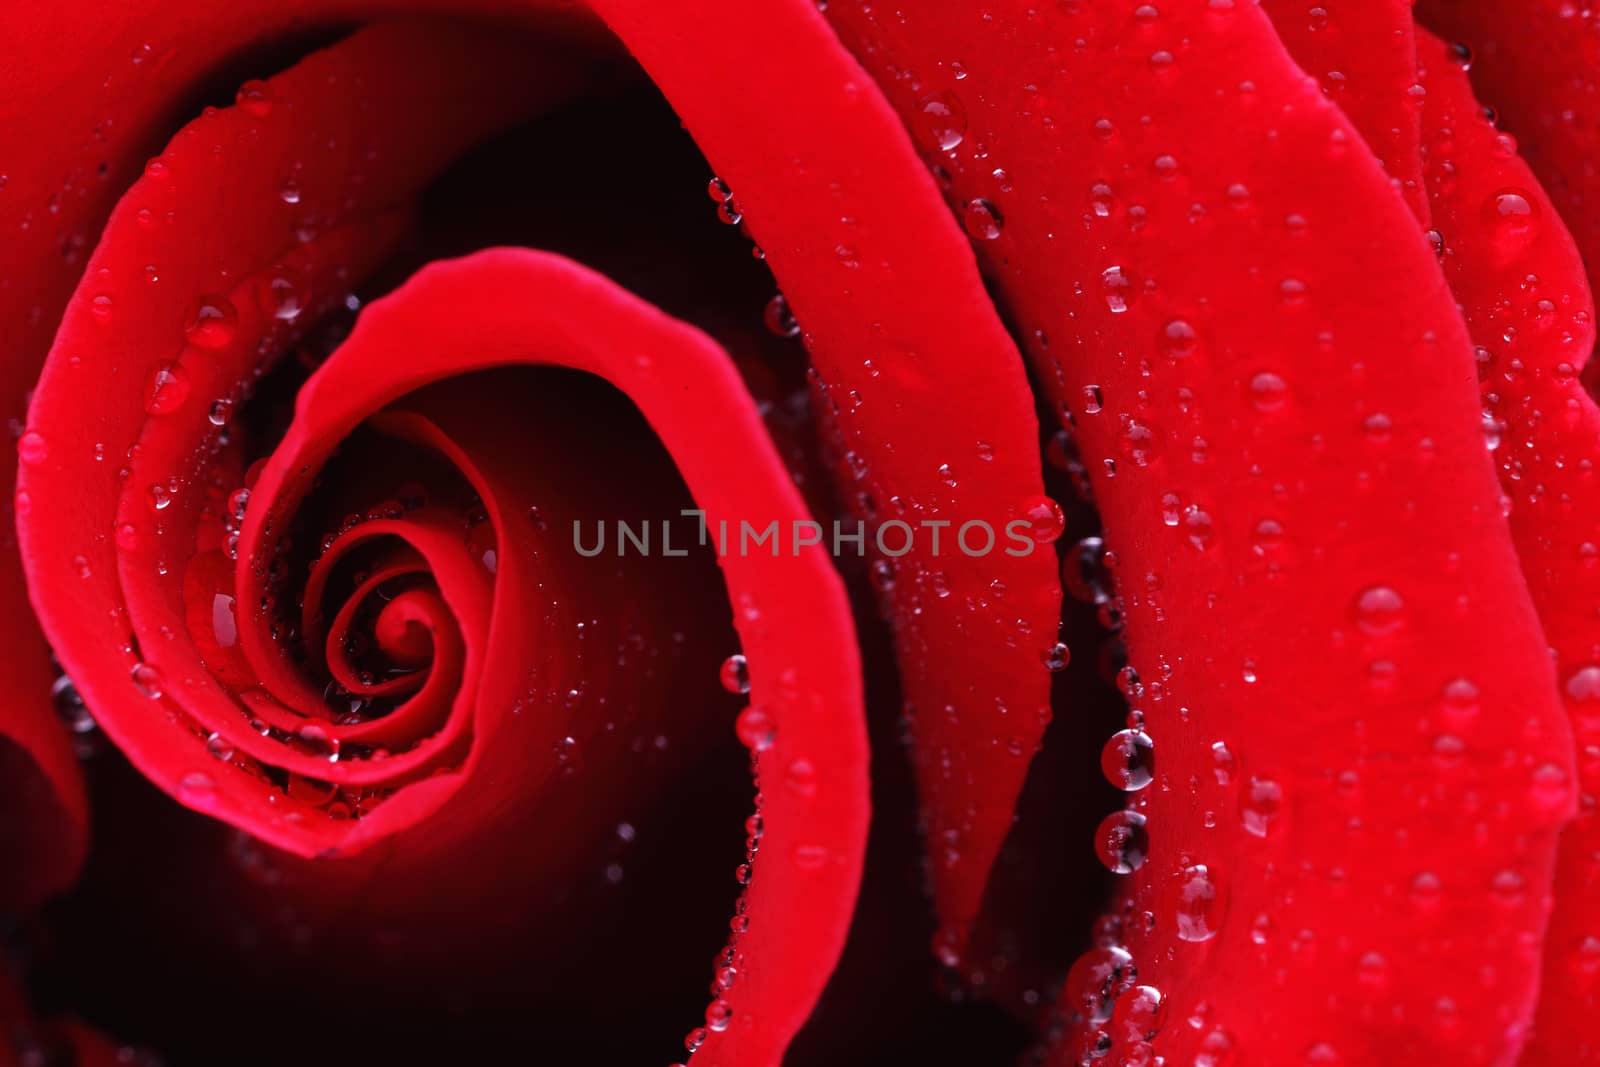 Macro shot of a red rose with water drops